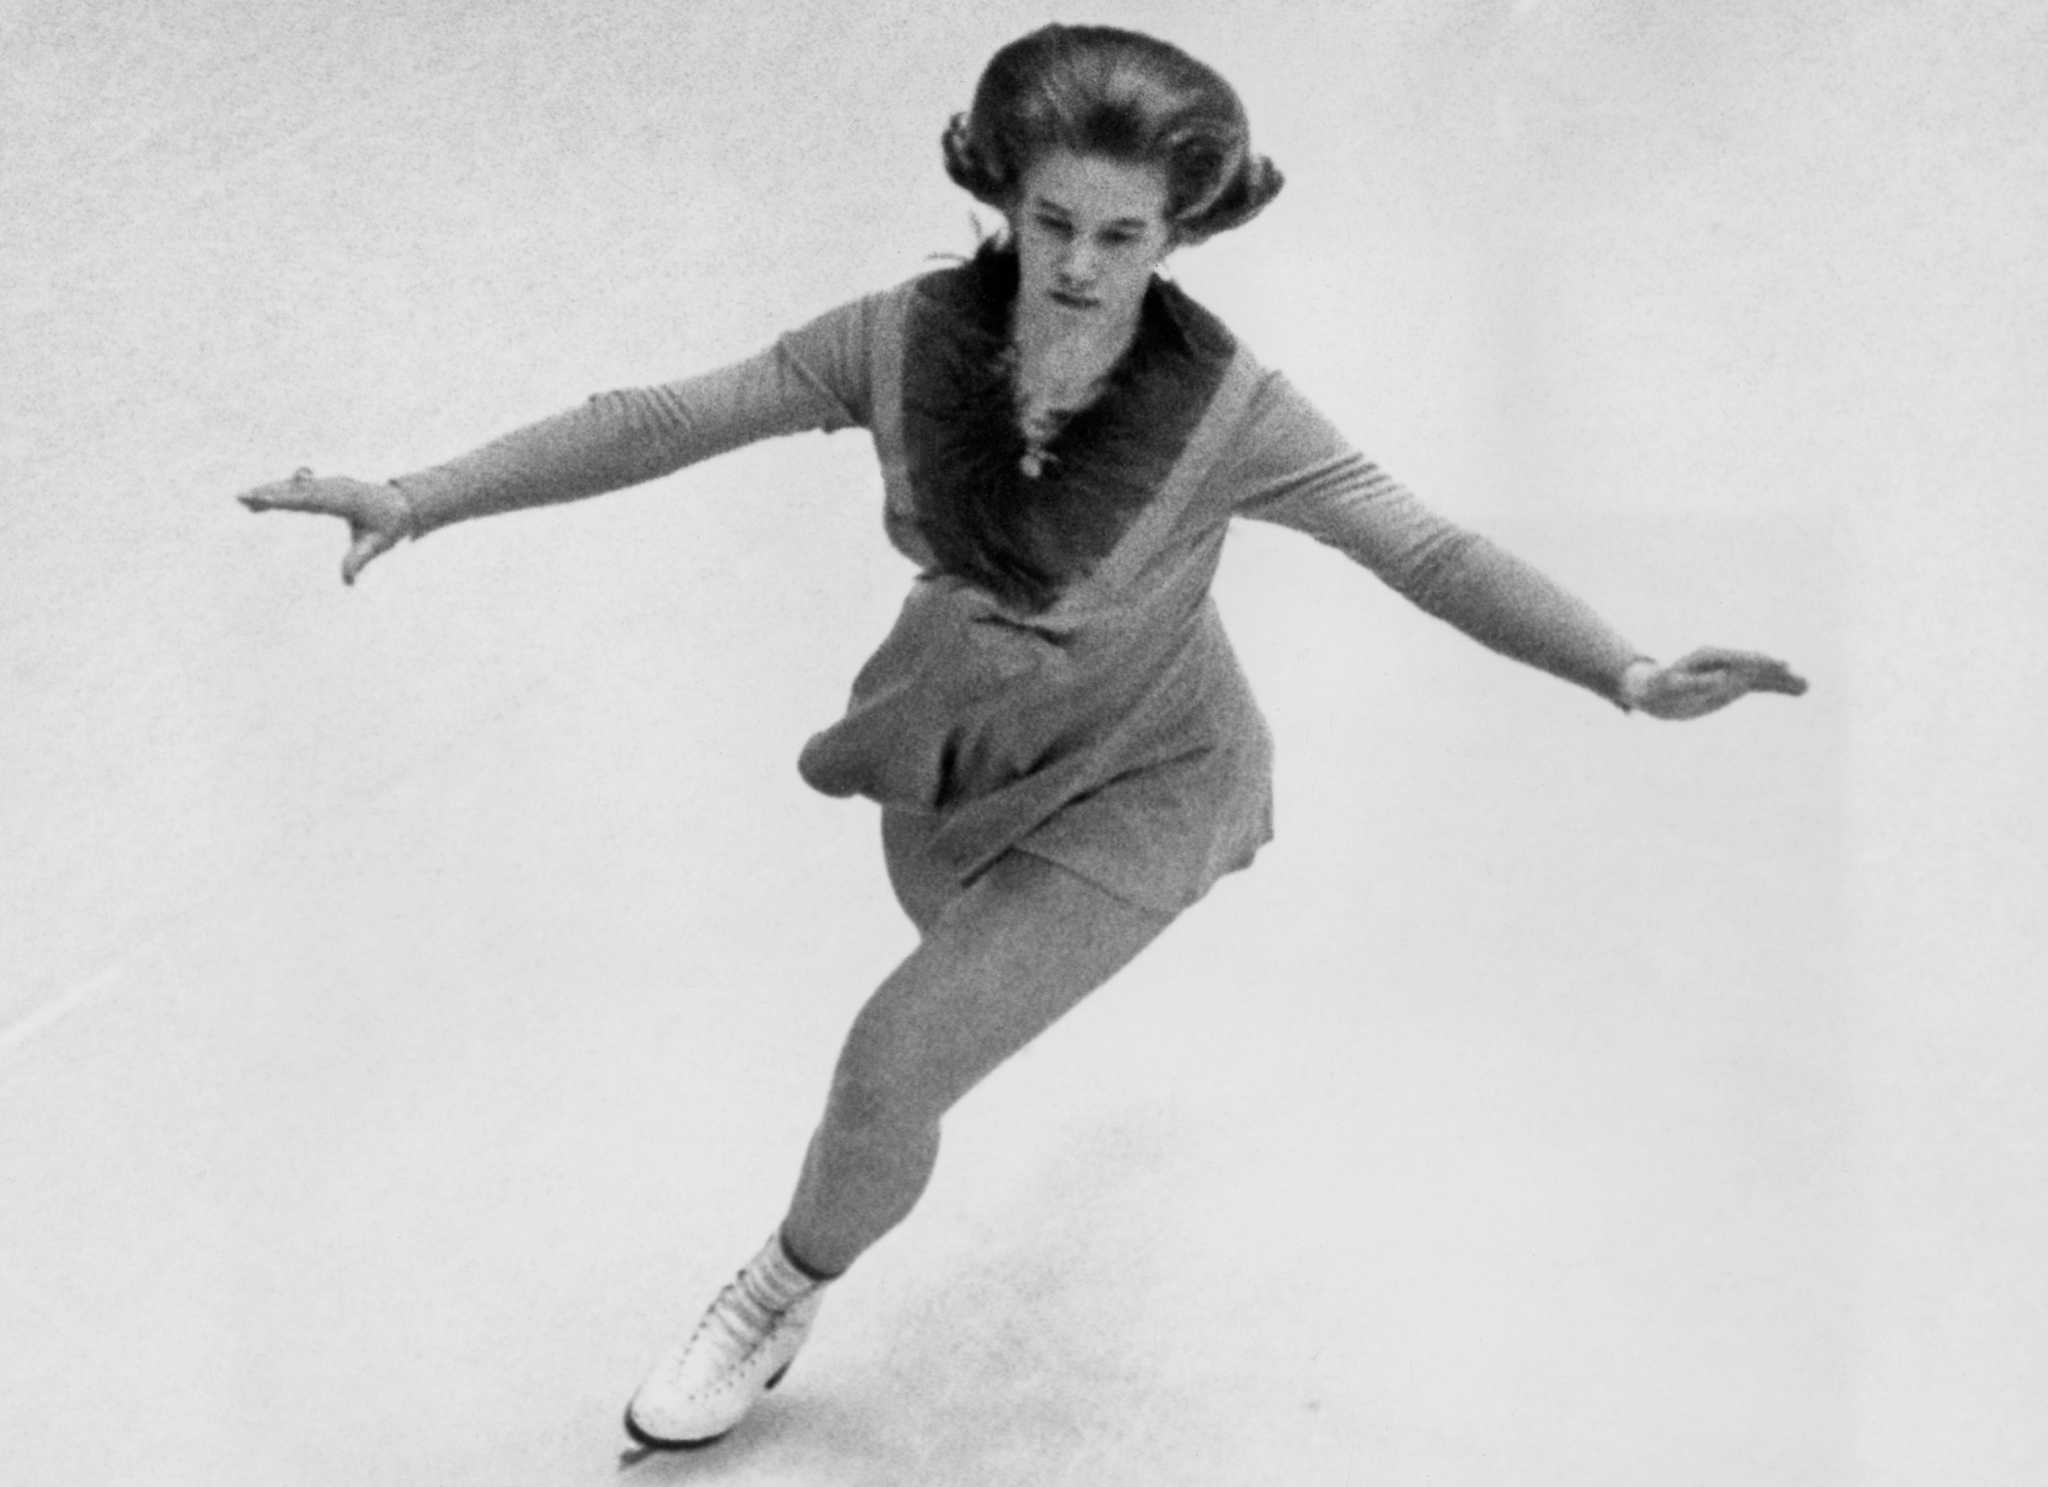 Sjoukje Dijkstra, the first Dutch athlete to win a gold medal at Winter Olympics, dies at 82